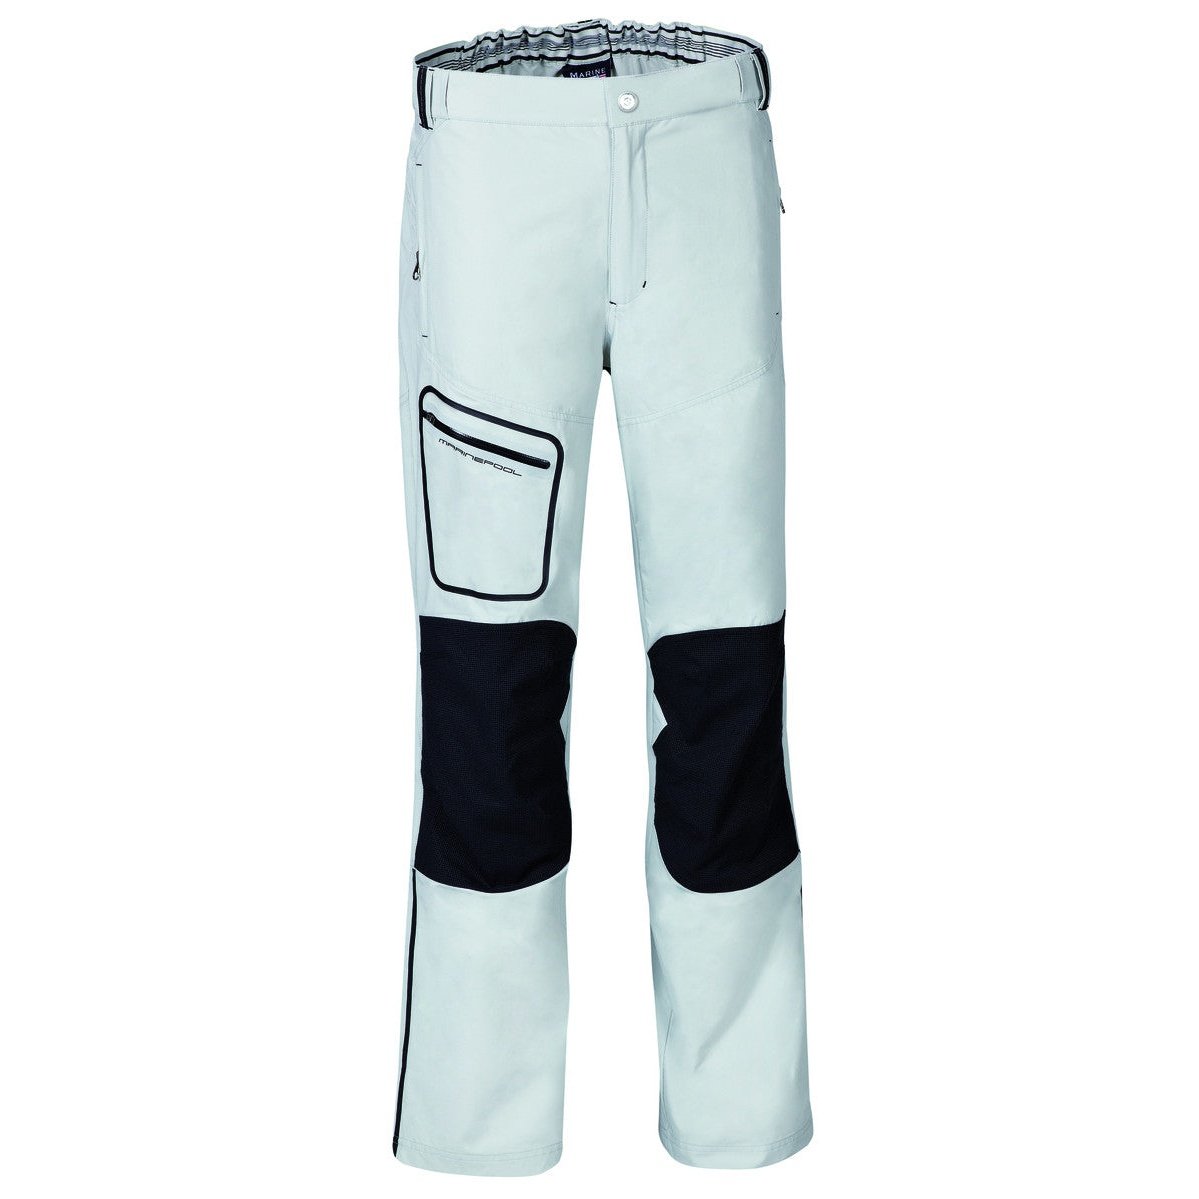 Super tough sailing trousers from Gill - boats.com